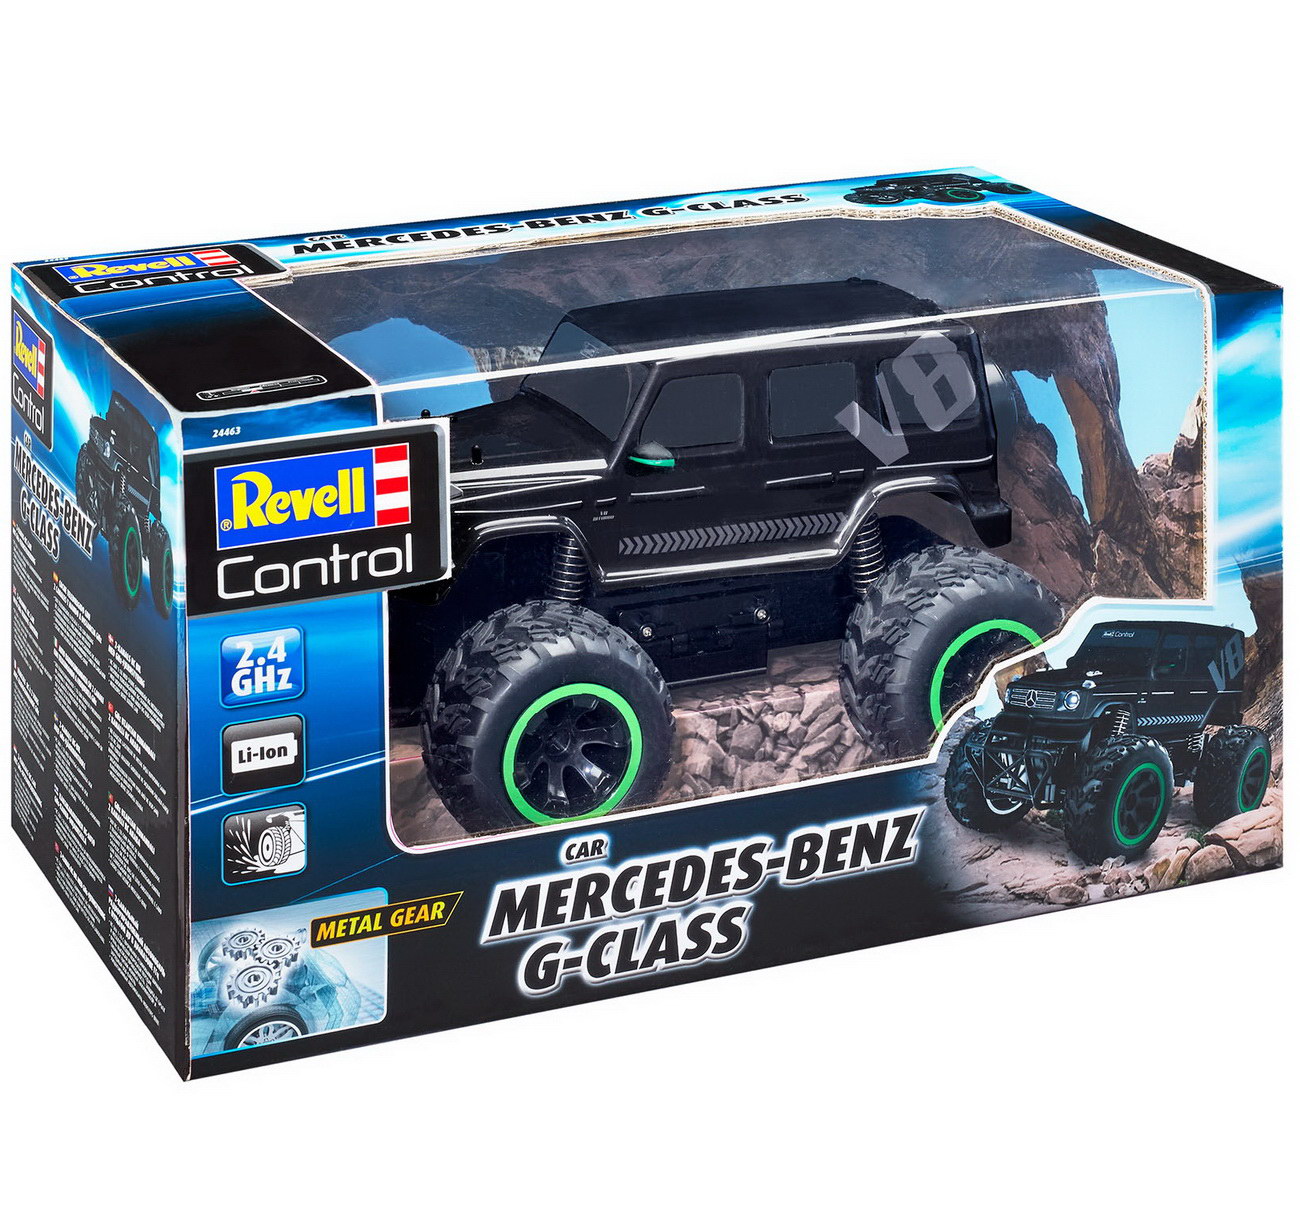 Revell Control 24463 - Mercedes G-Class - RC Auto